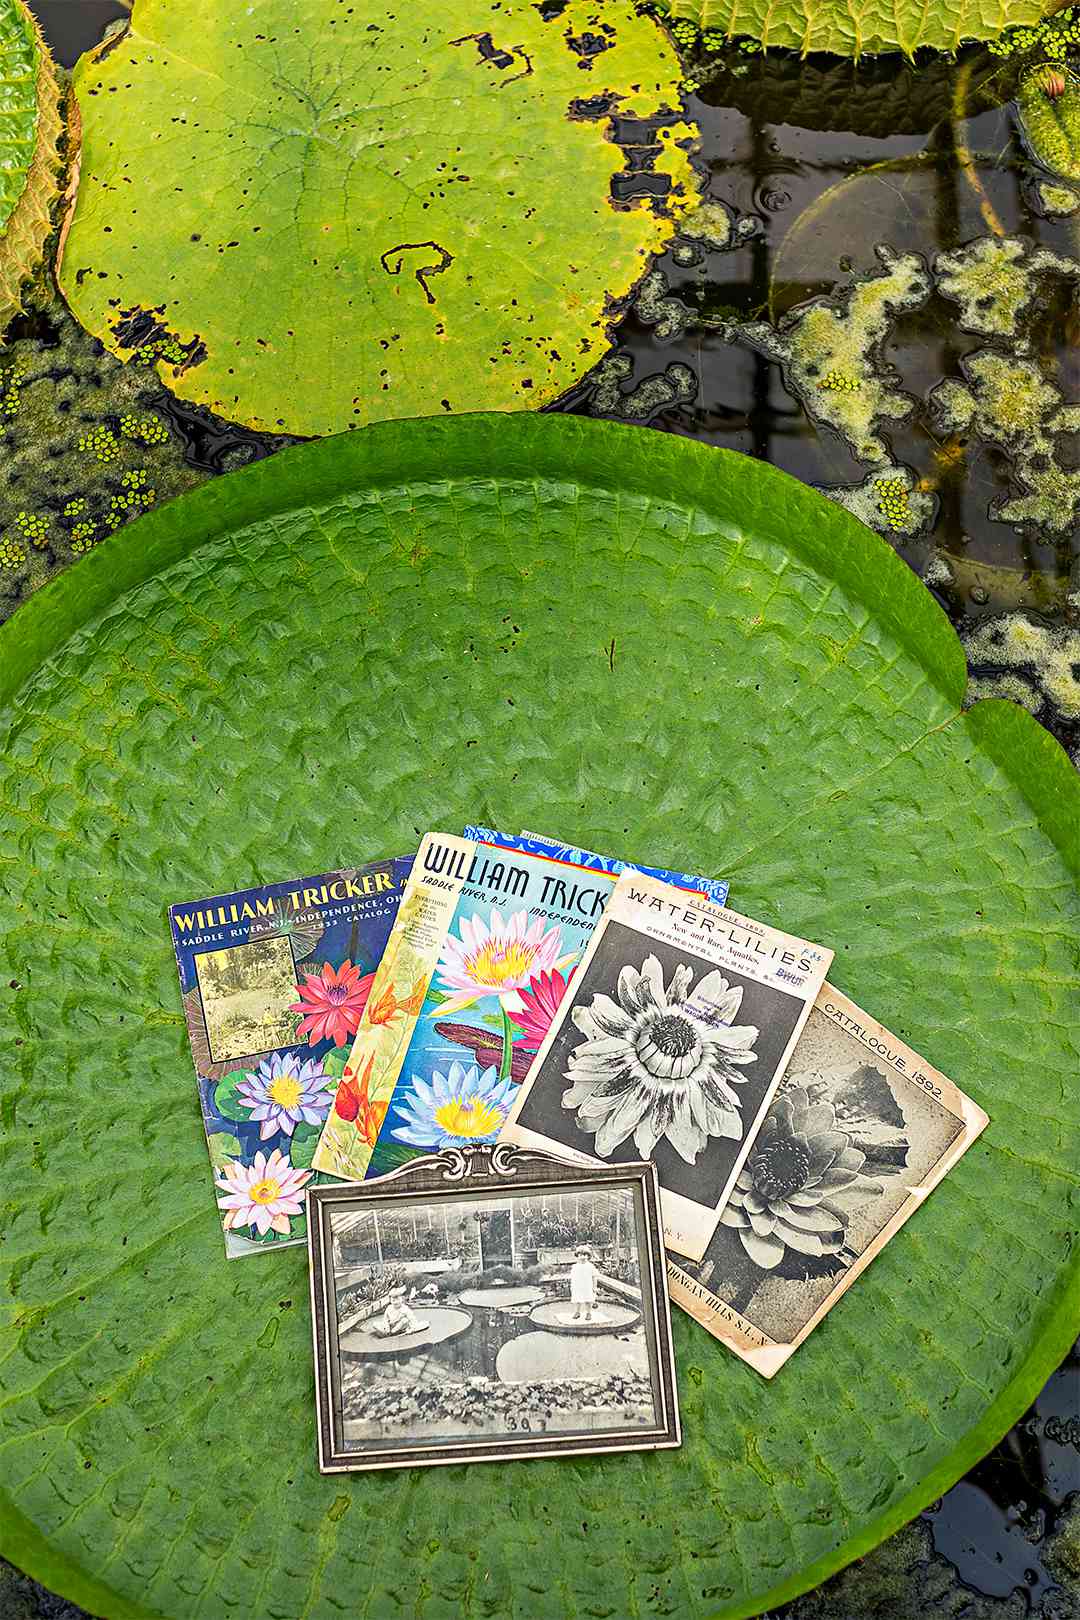 floral catalogues and photograph on water lily pad